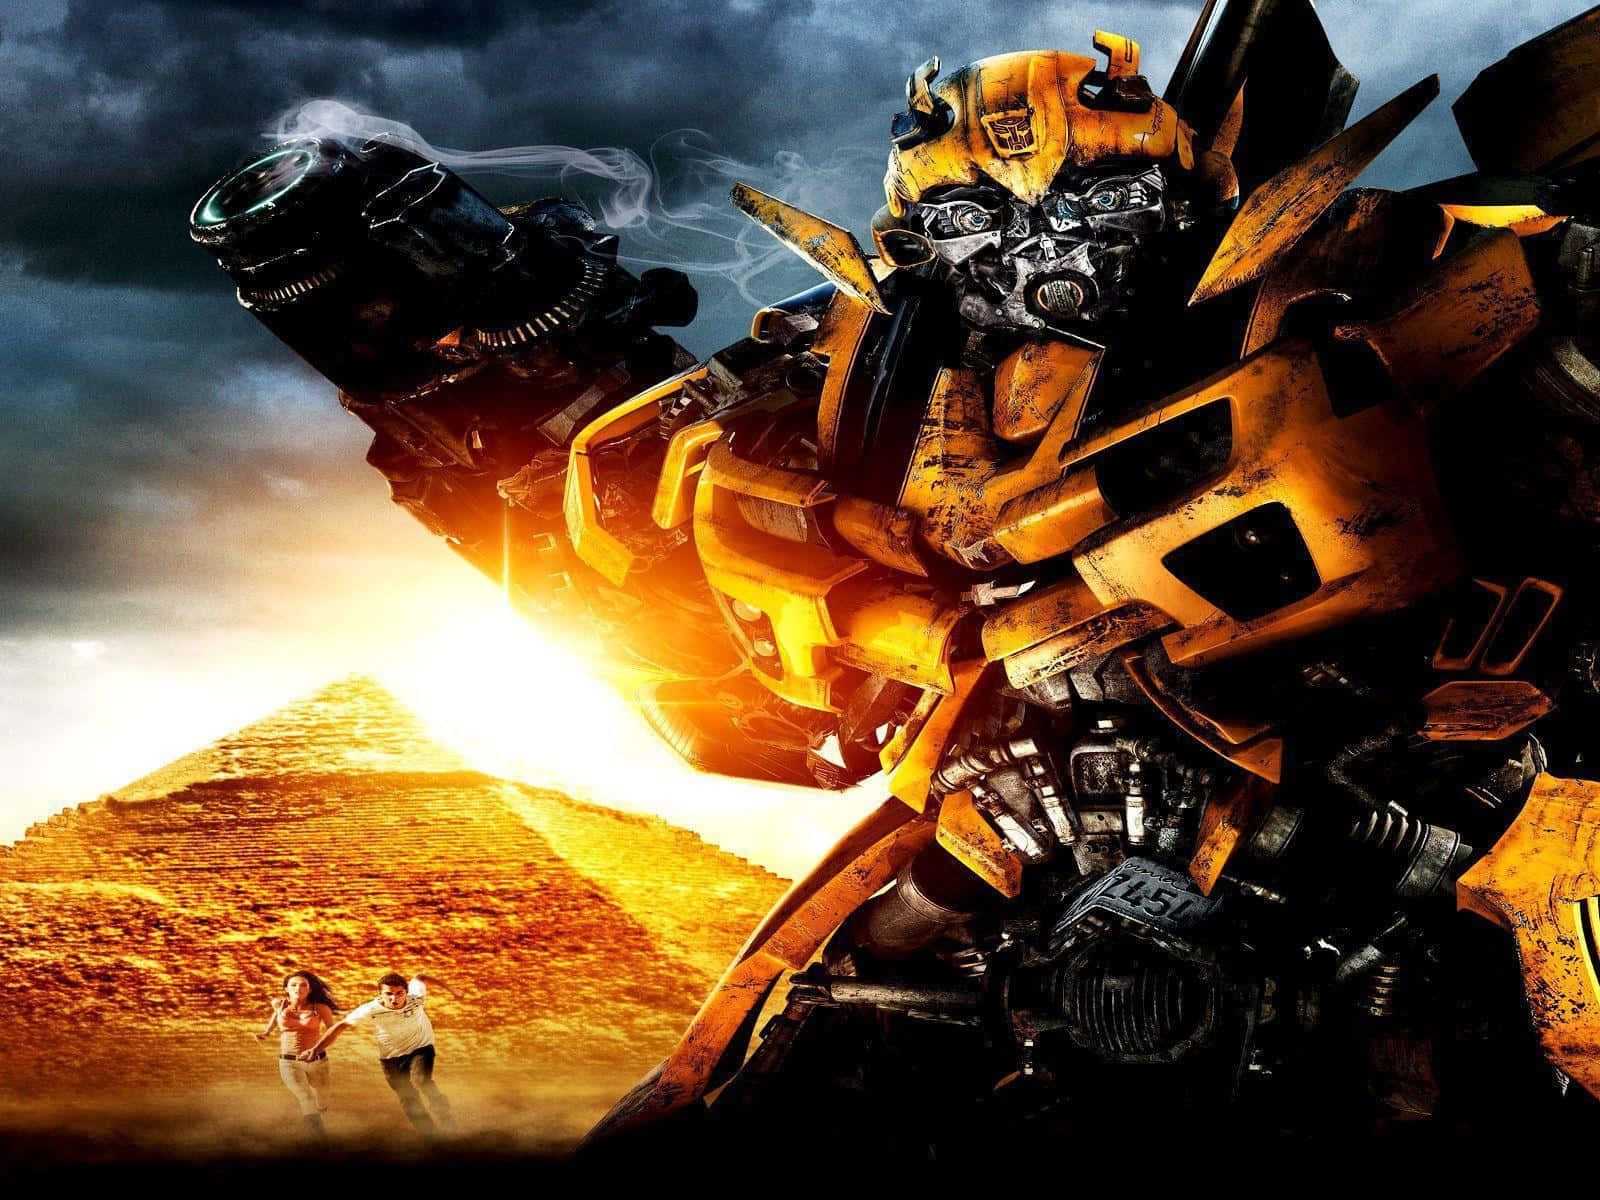 Bumblebee Stares Down The Decepticons - Ready For Action Background